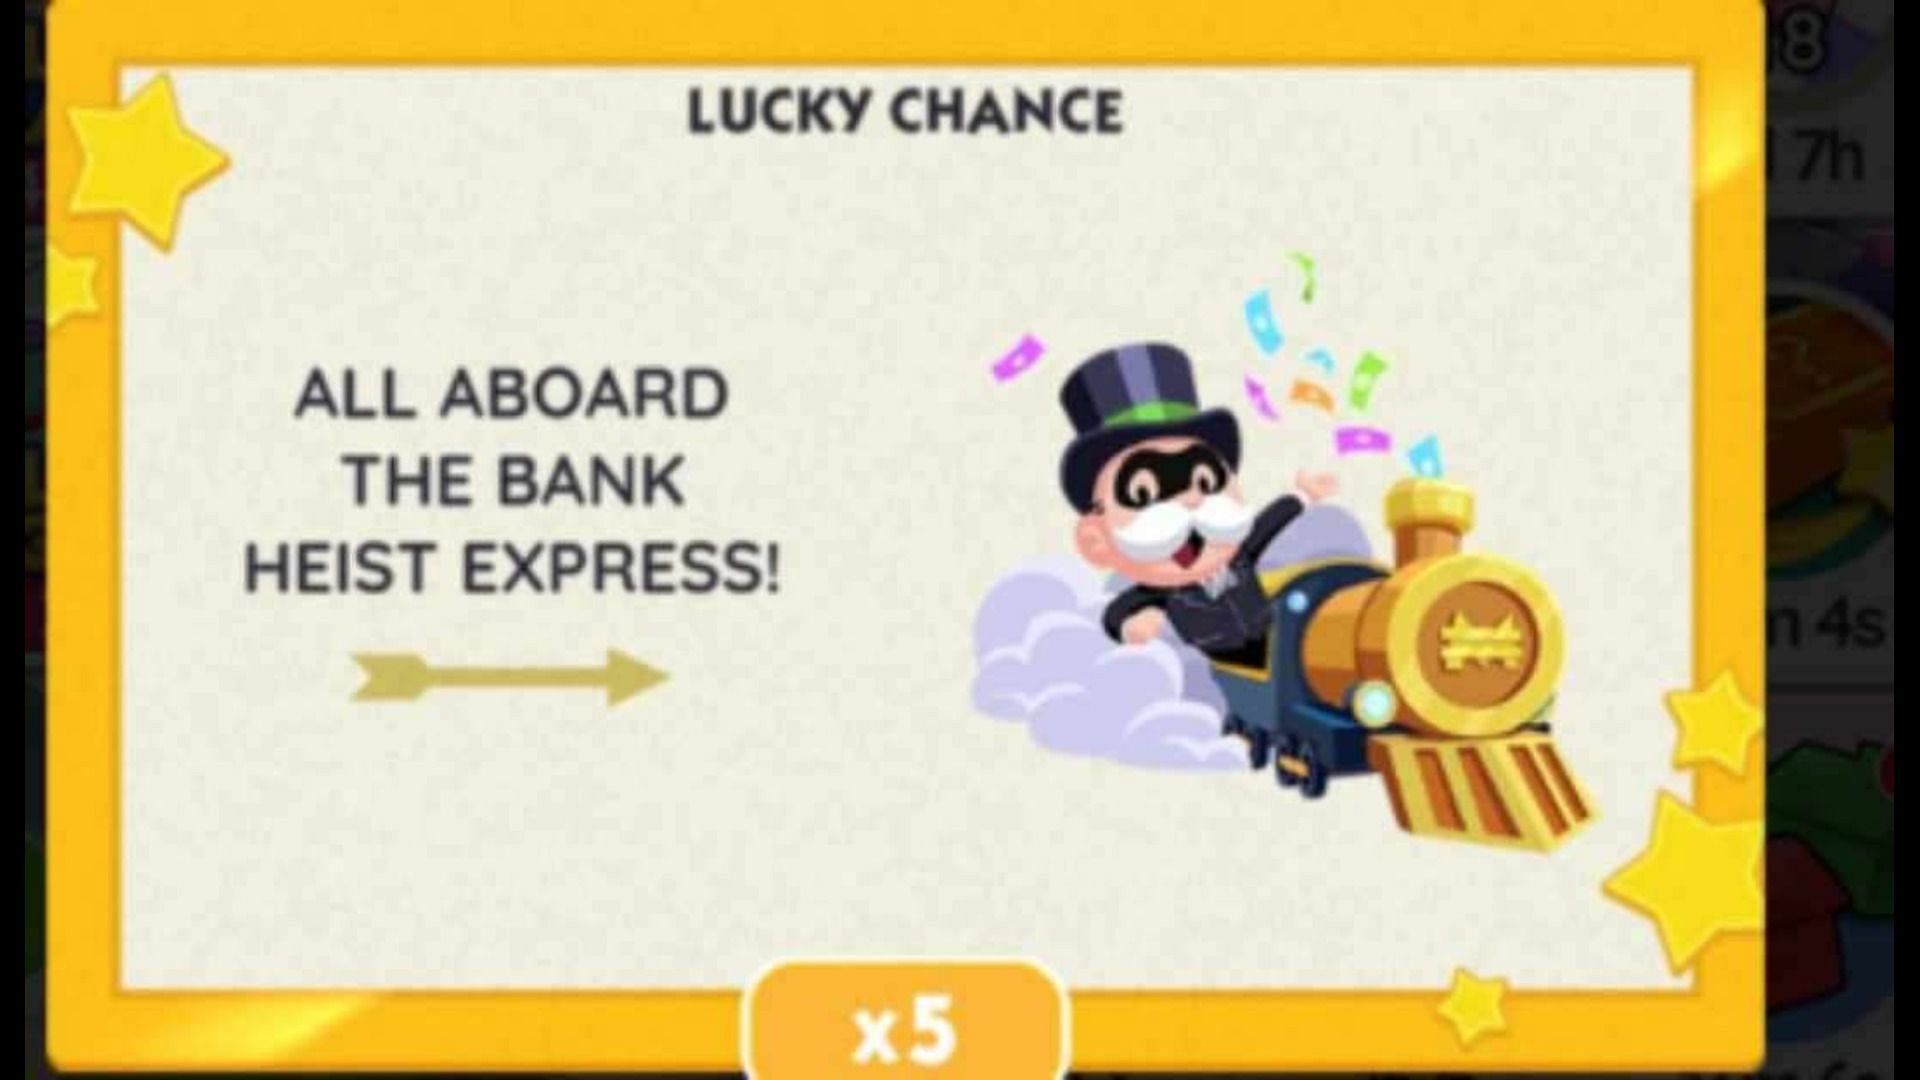 Monopoly Go Lucky Chance event